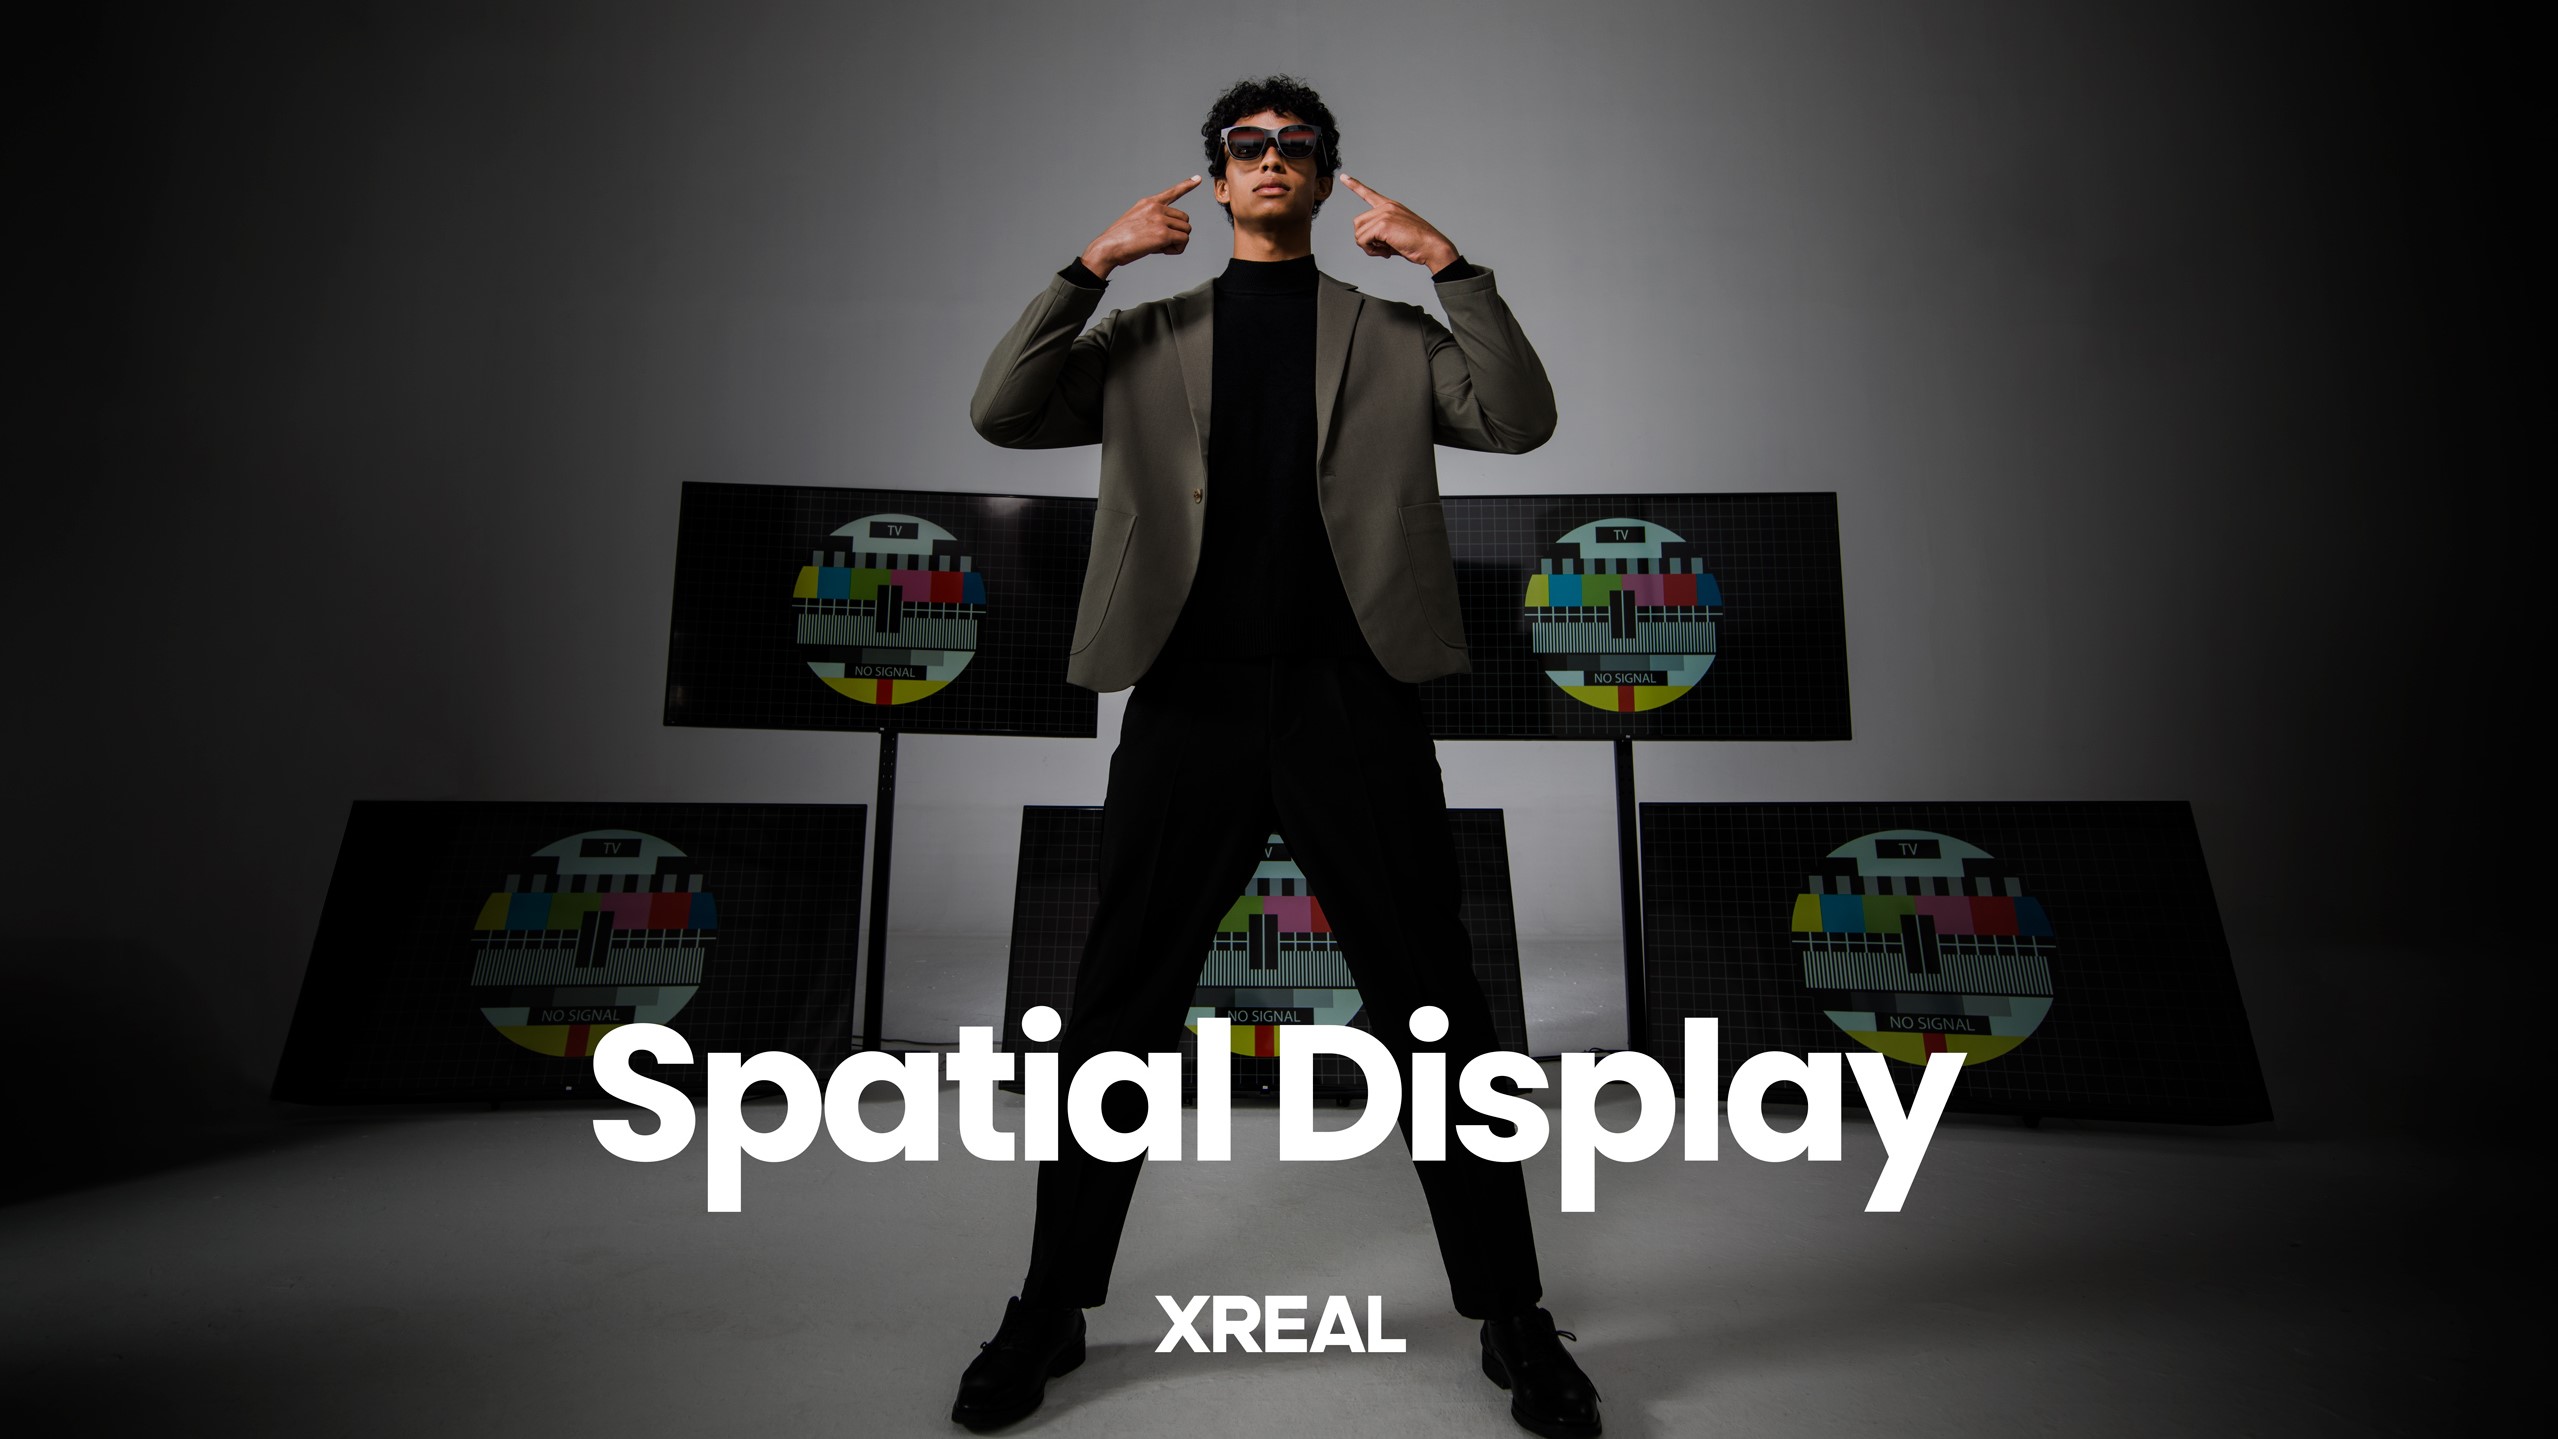 A person points at the Xreal Air glasses they're wearing, multiple displays are behind them, the words "Spatial Display" are in front of them